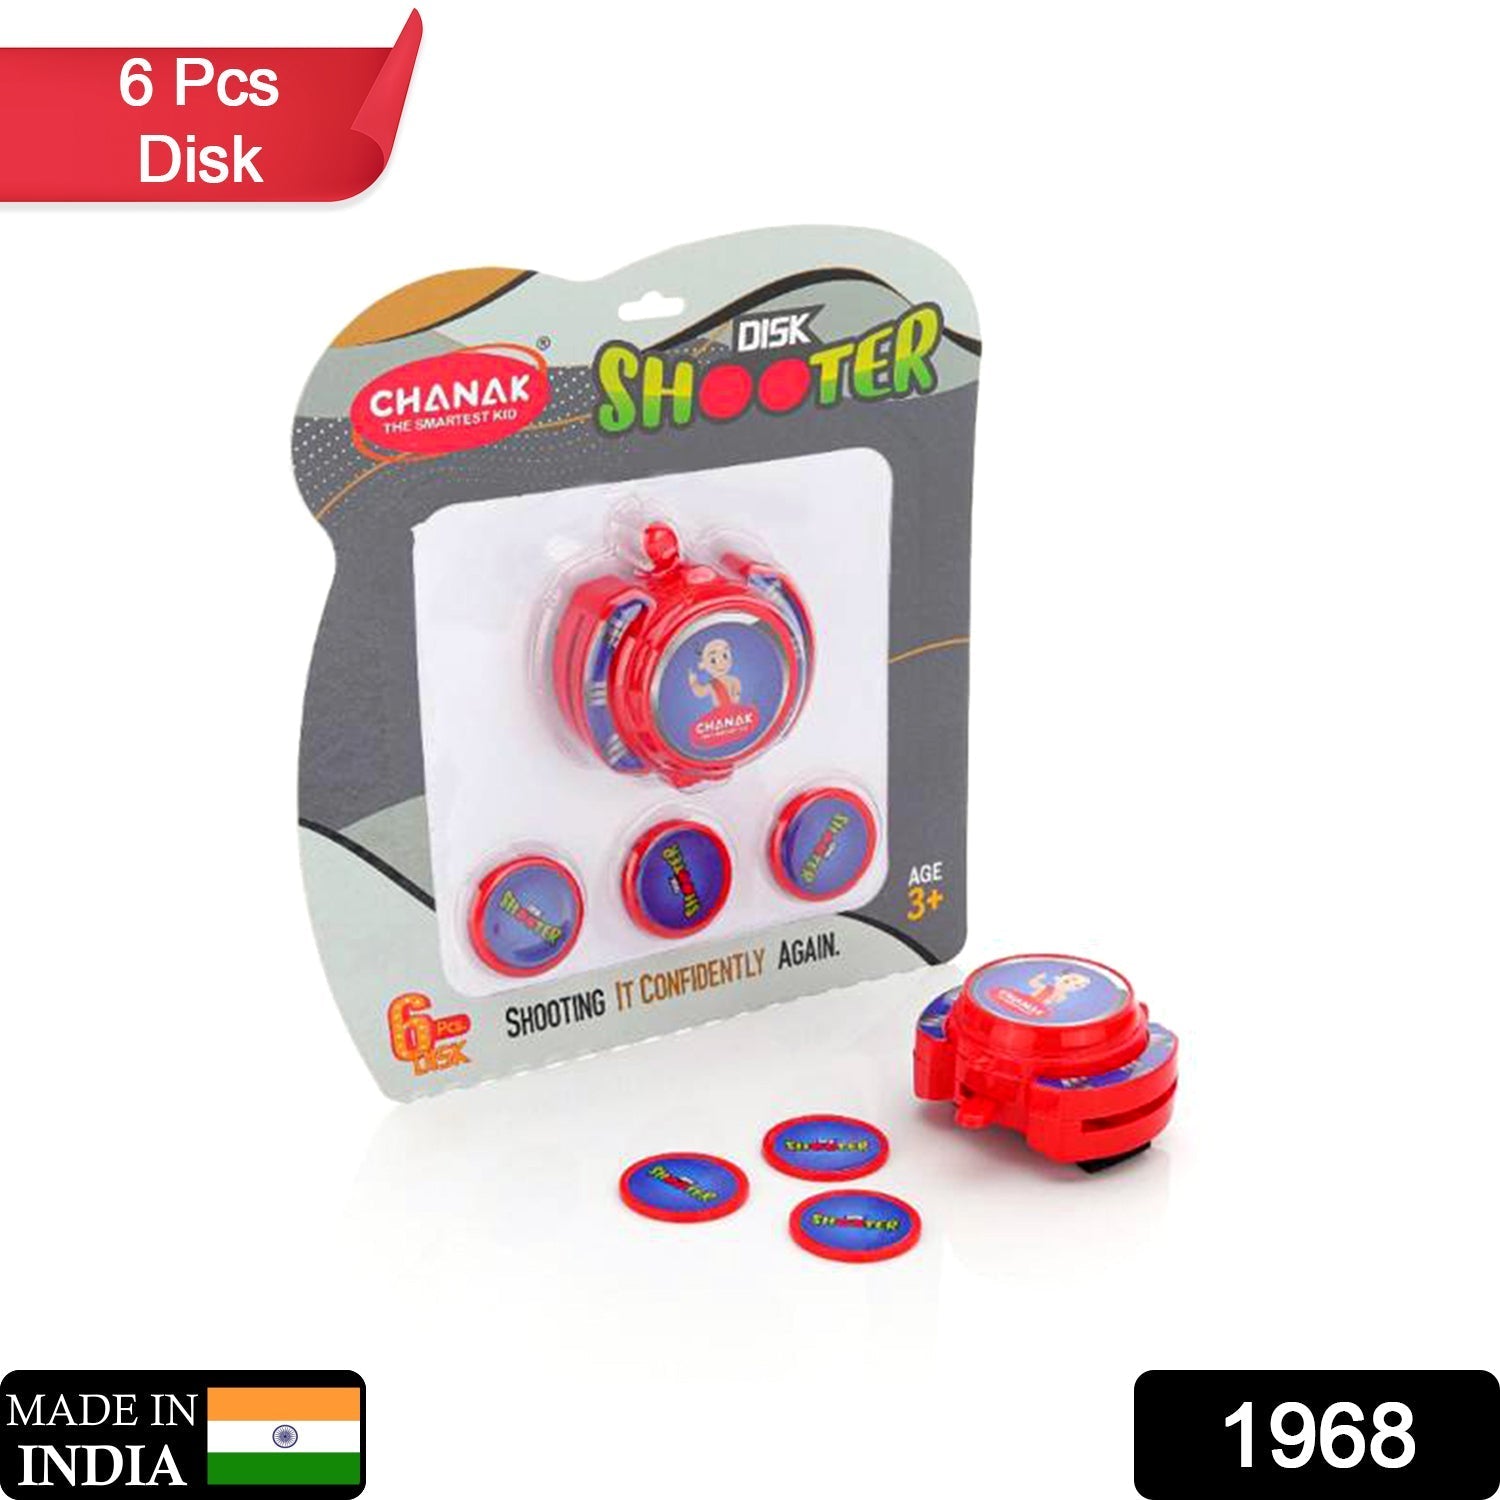 1968 EXCITING HAND DISK SHOOTER TOYS GAME SET FOR KIDS. AMAZING FLYING DISC GAME. INDOOR & OUTDOOR 